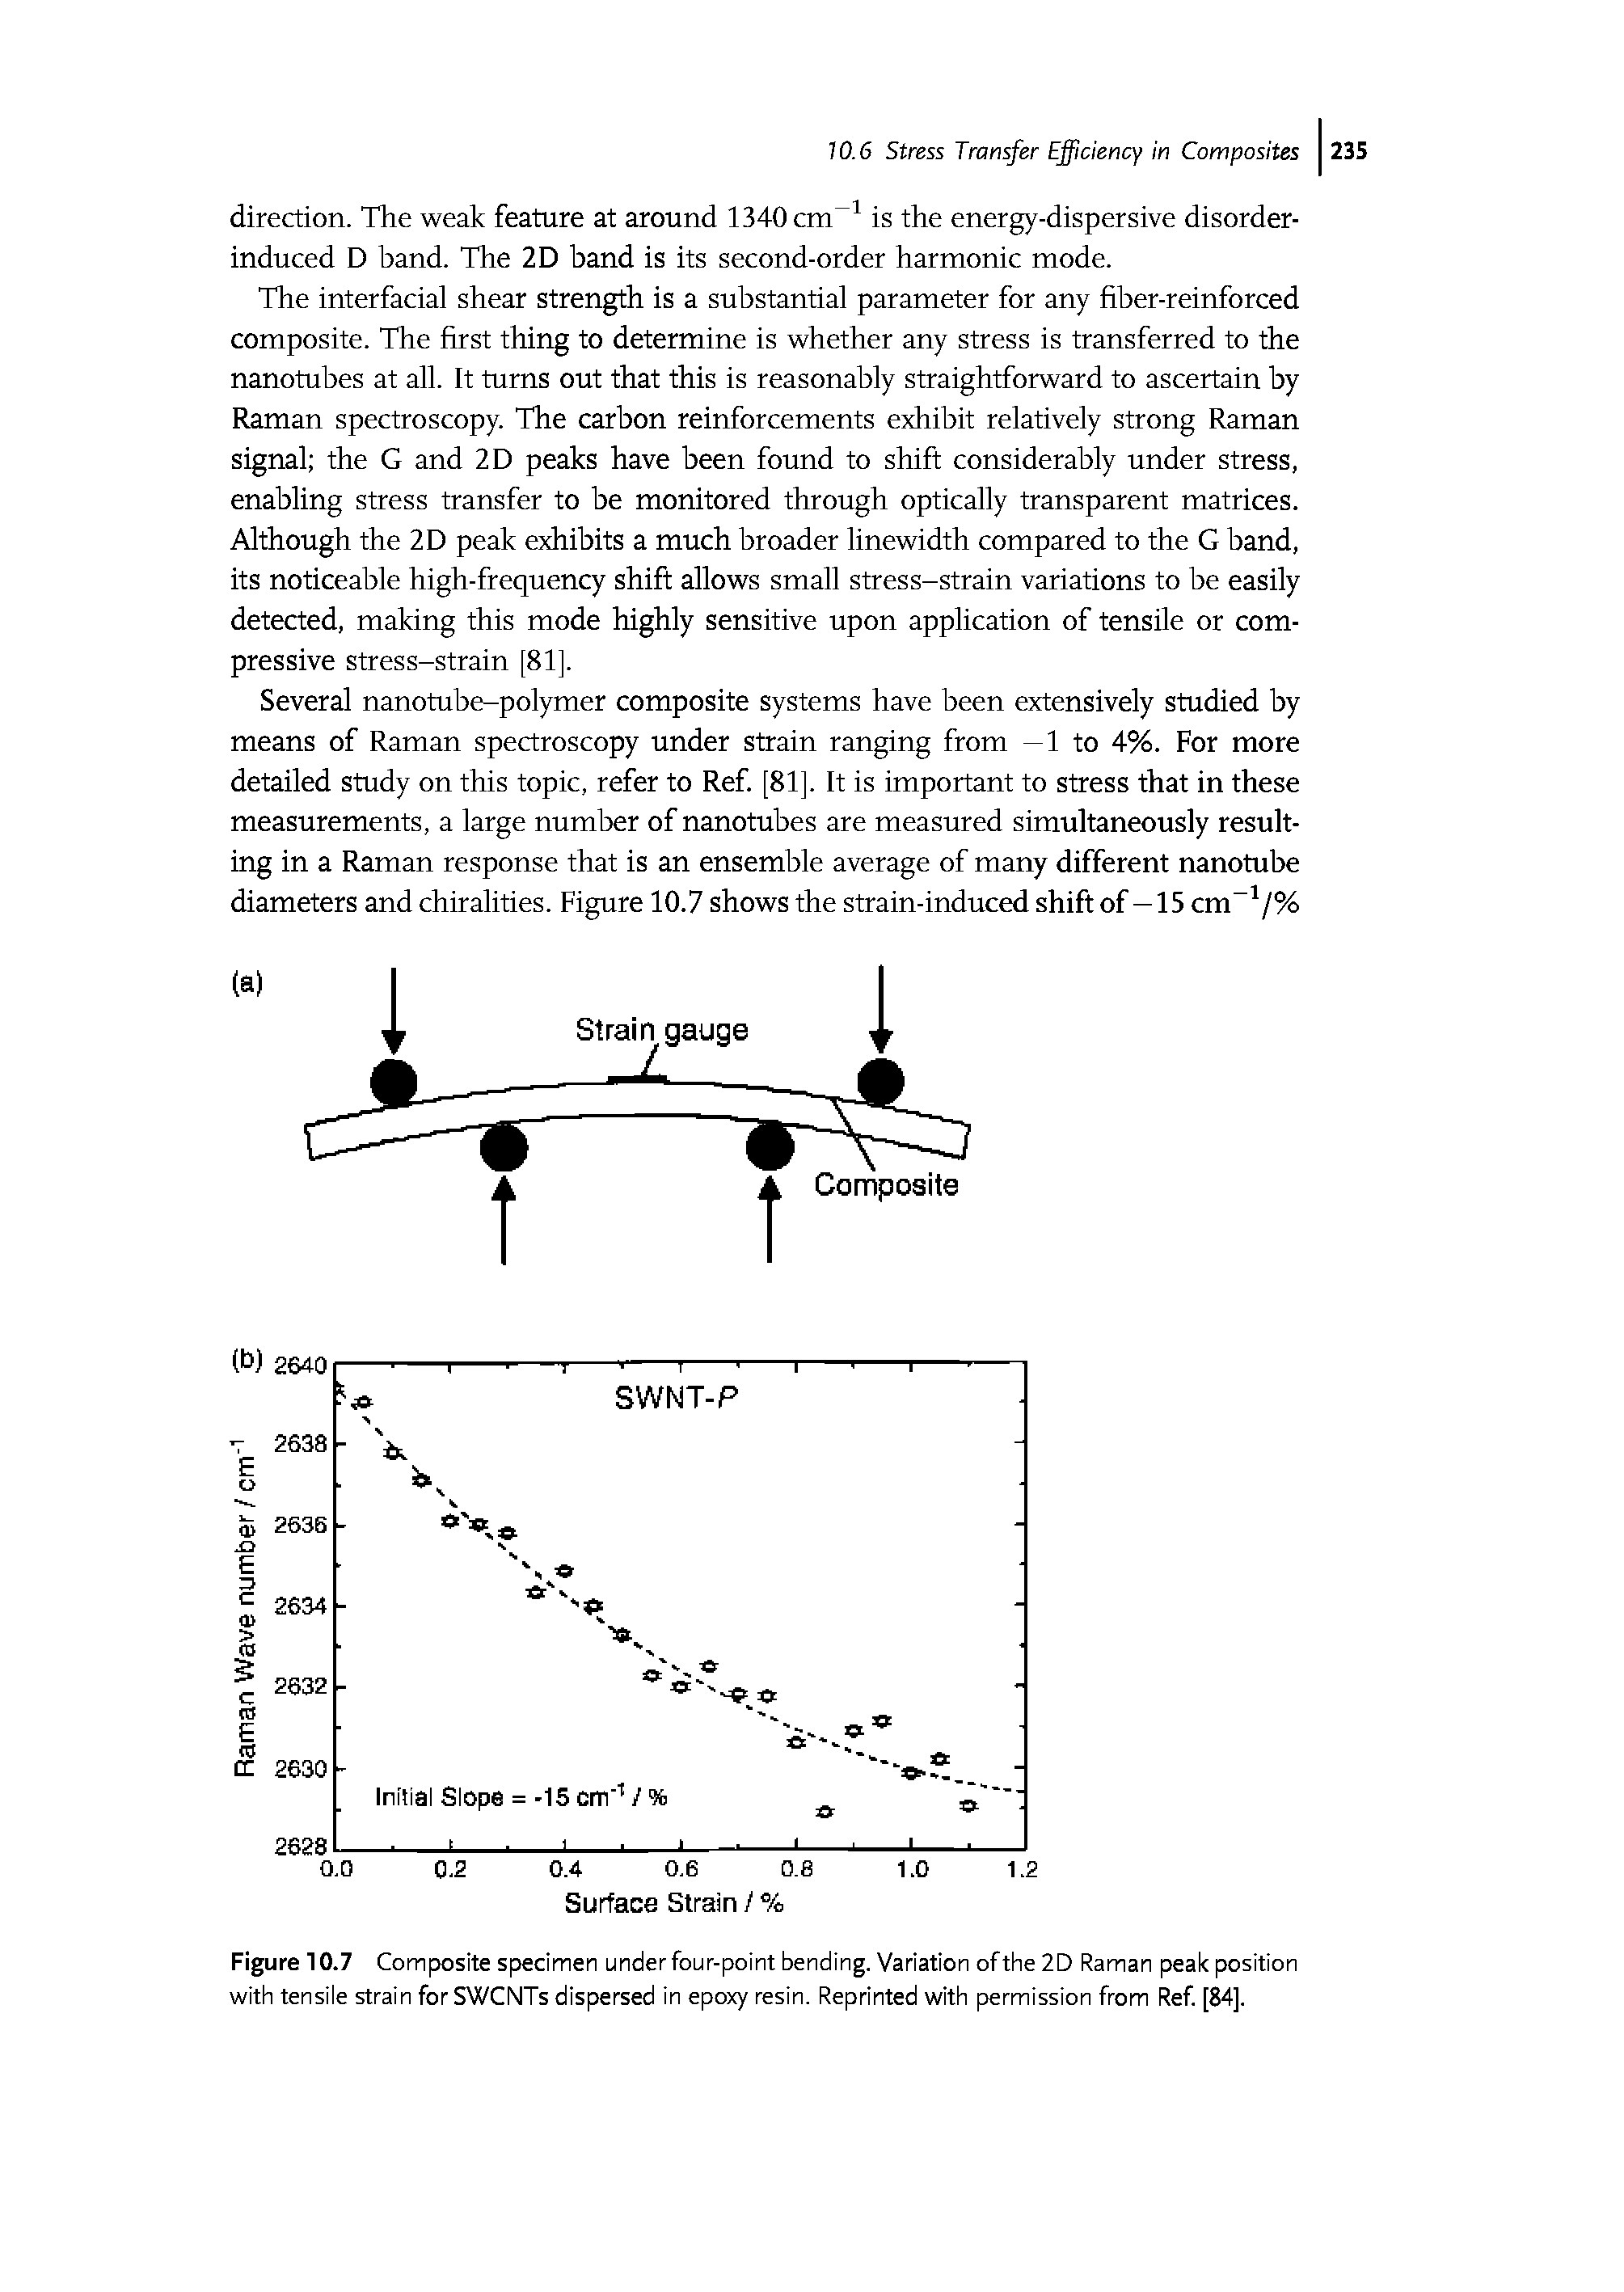 Figure 10.7 Composite specimen under four-point bending. Variation of the 2D Raman peak position with tensile strain for SWCNTs dispersed in epoxy resin. Reprinted with permission from Ref [84].